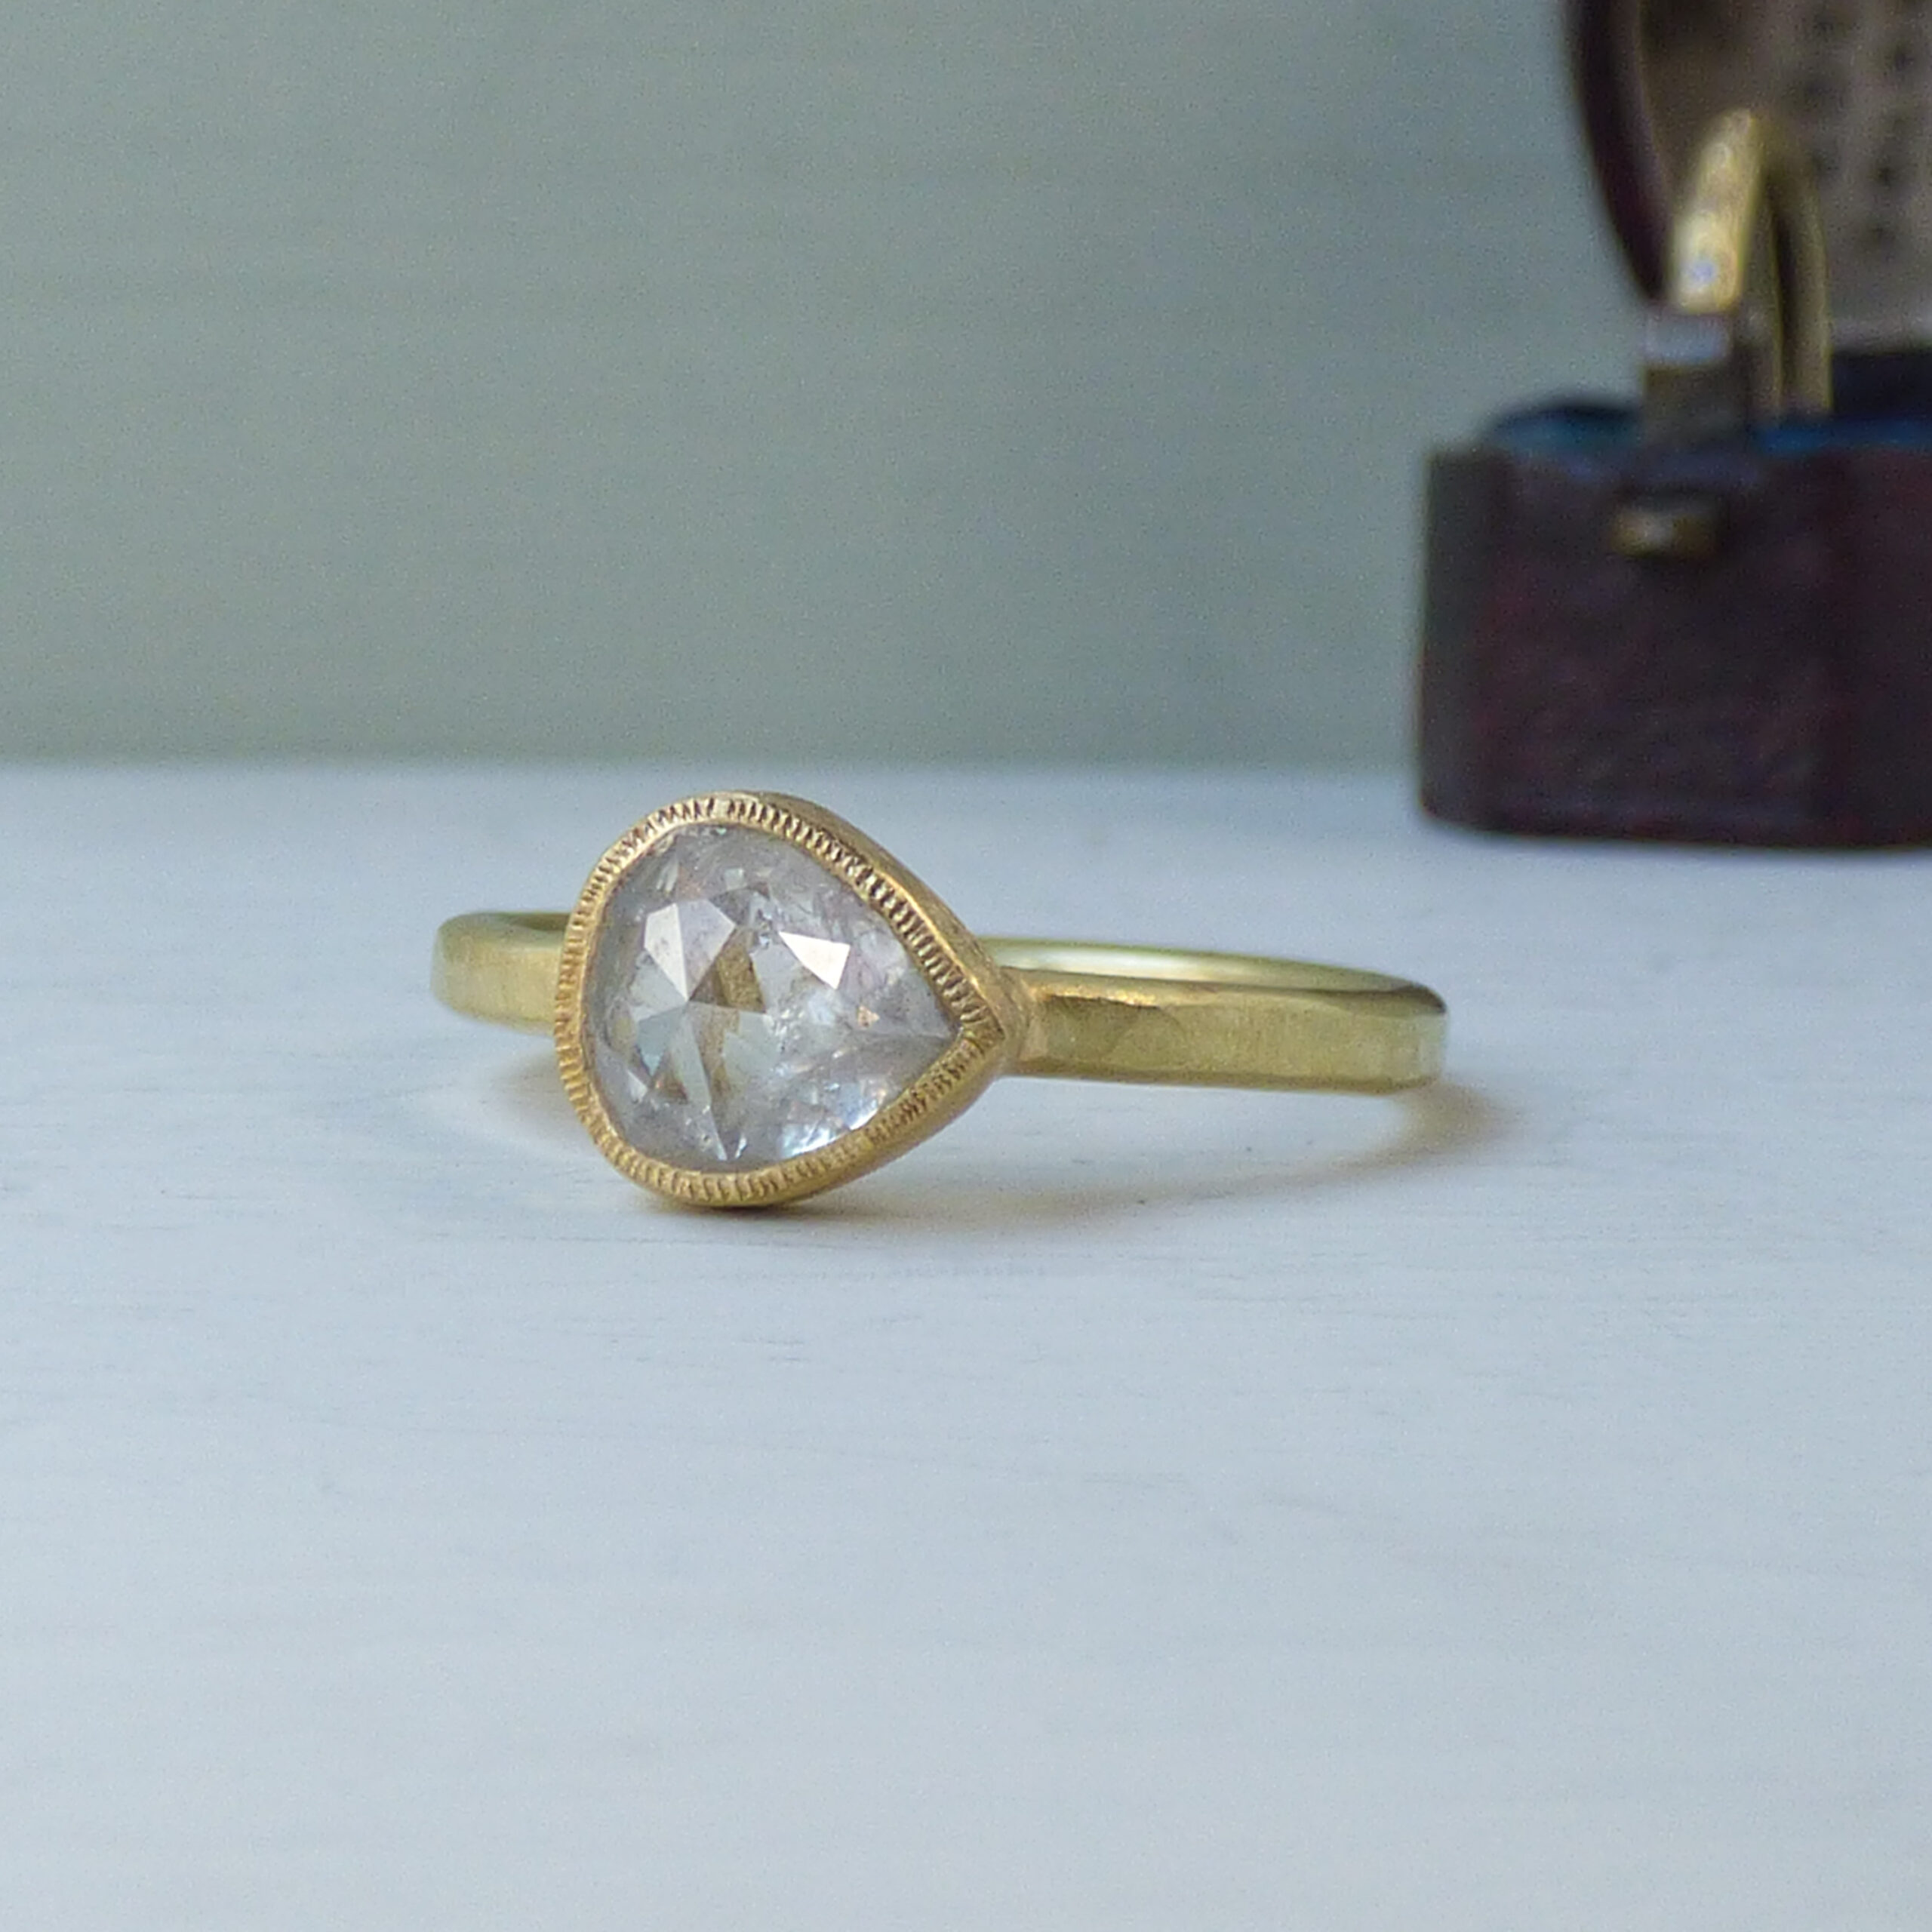 Effie ethical engagement ring A high top icy rose cut diamond 1.4 carats set in 18ct Fairtrade gold